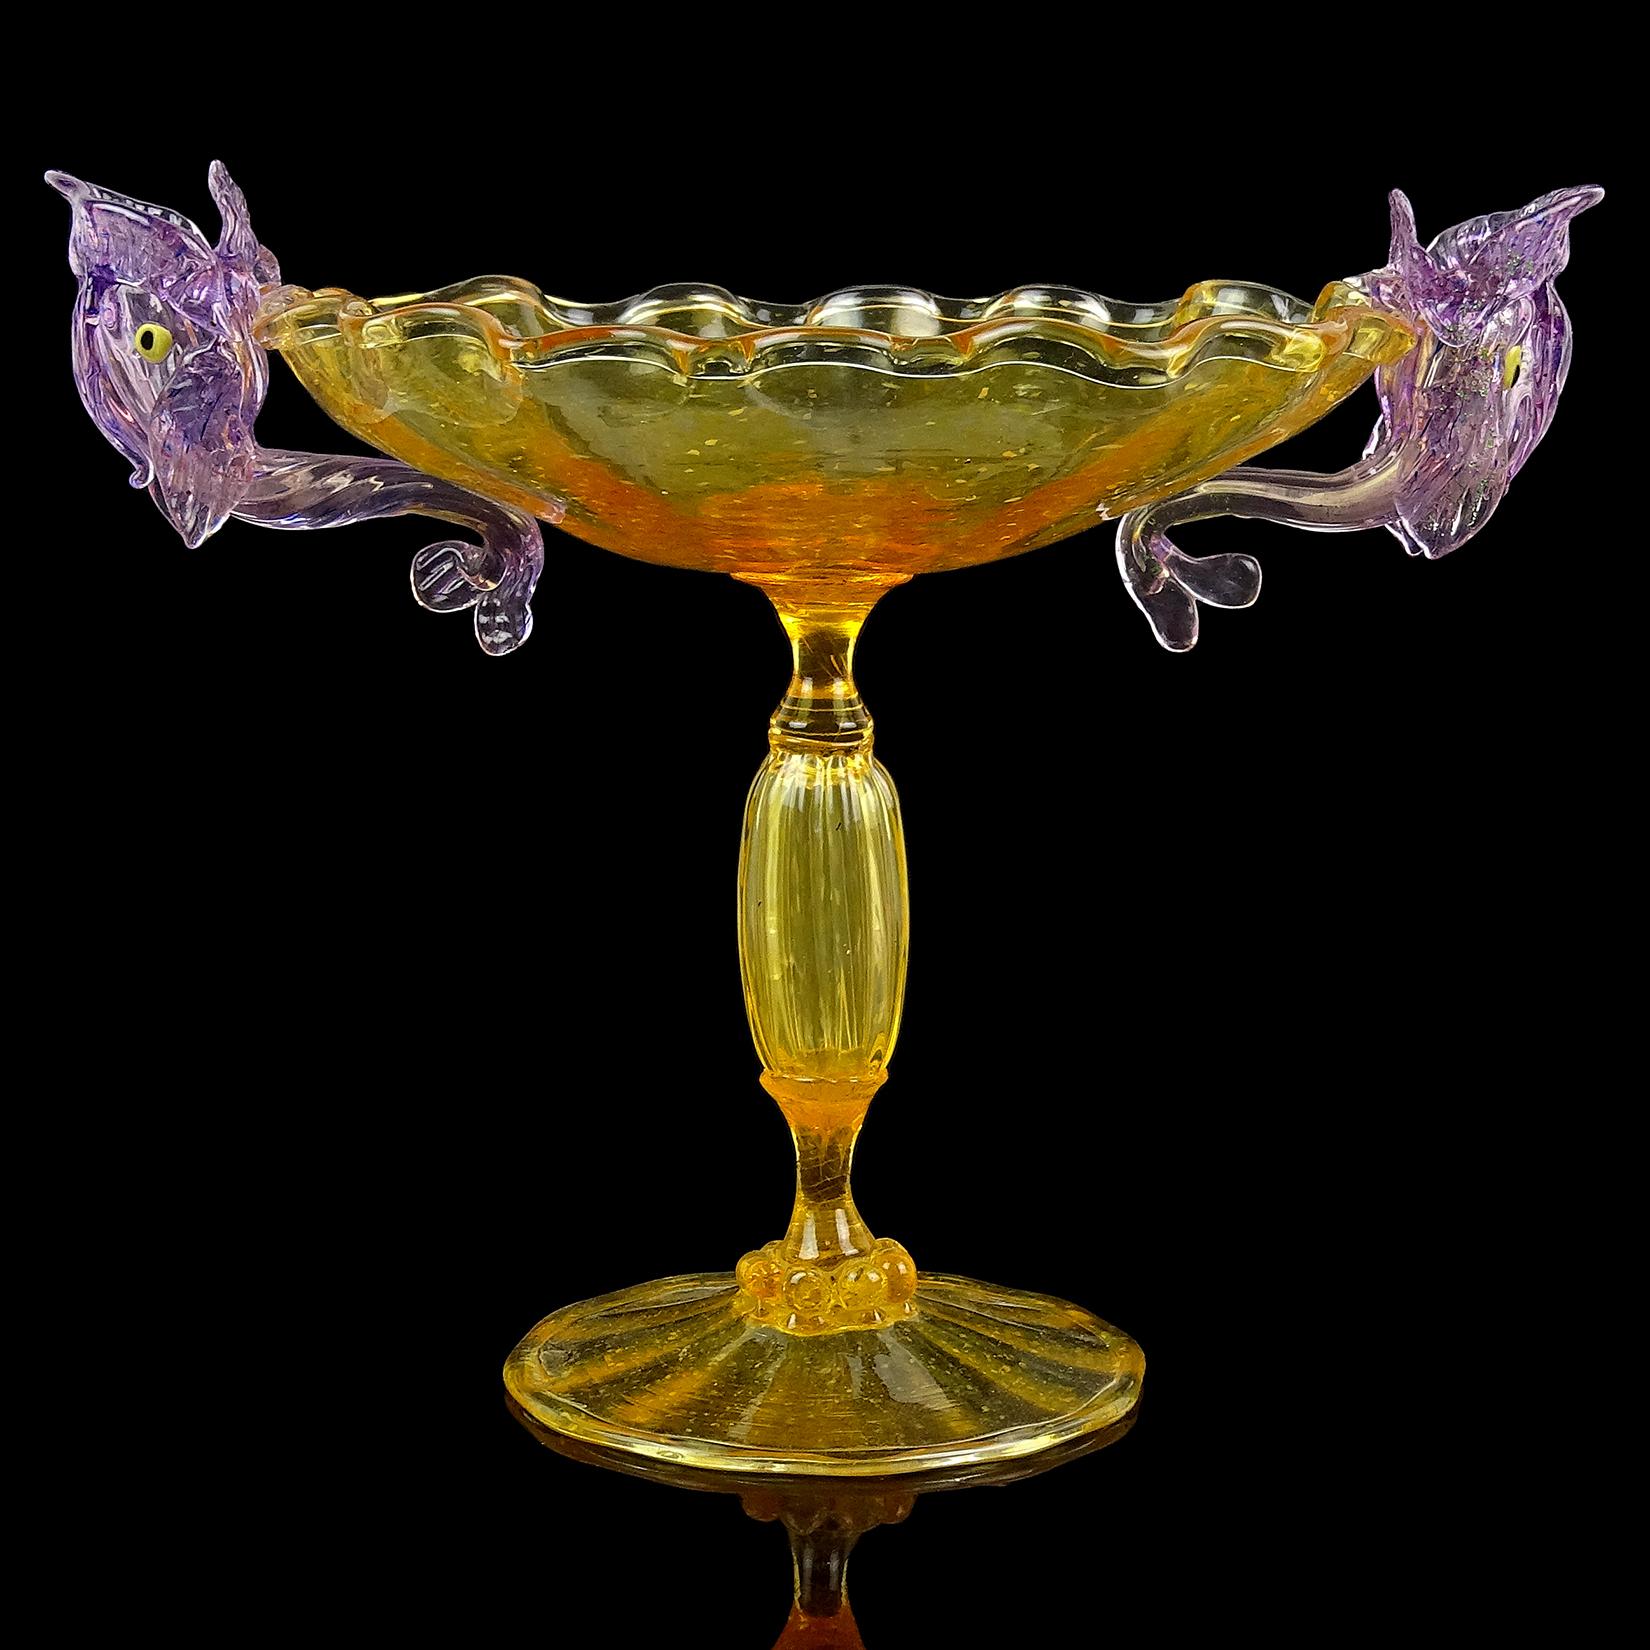 Beautiful, antique, early Venetian / Murano hand blown orange Italian art glass tall footed compote bowl / candleholder with applied purple fish decoration. Created in the manner of the Salviati and Fratelli Toso companies. The color within the